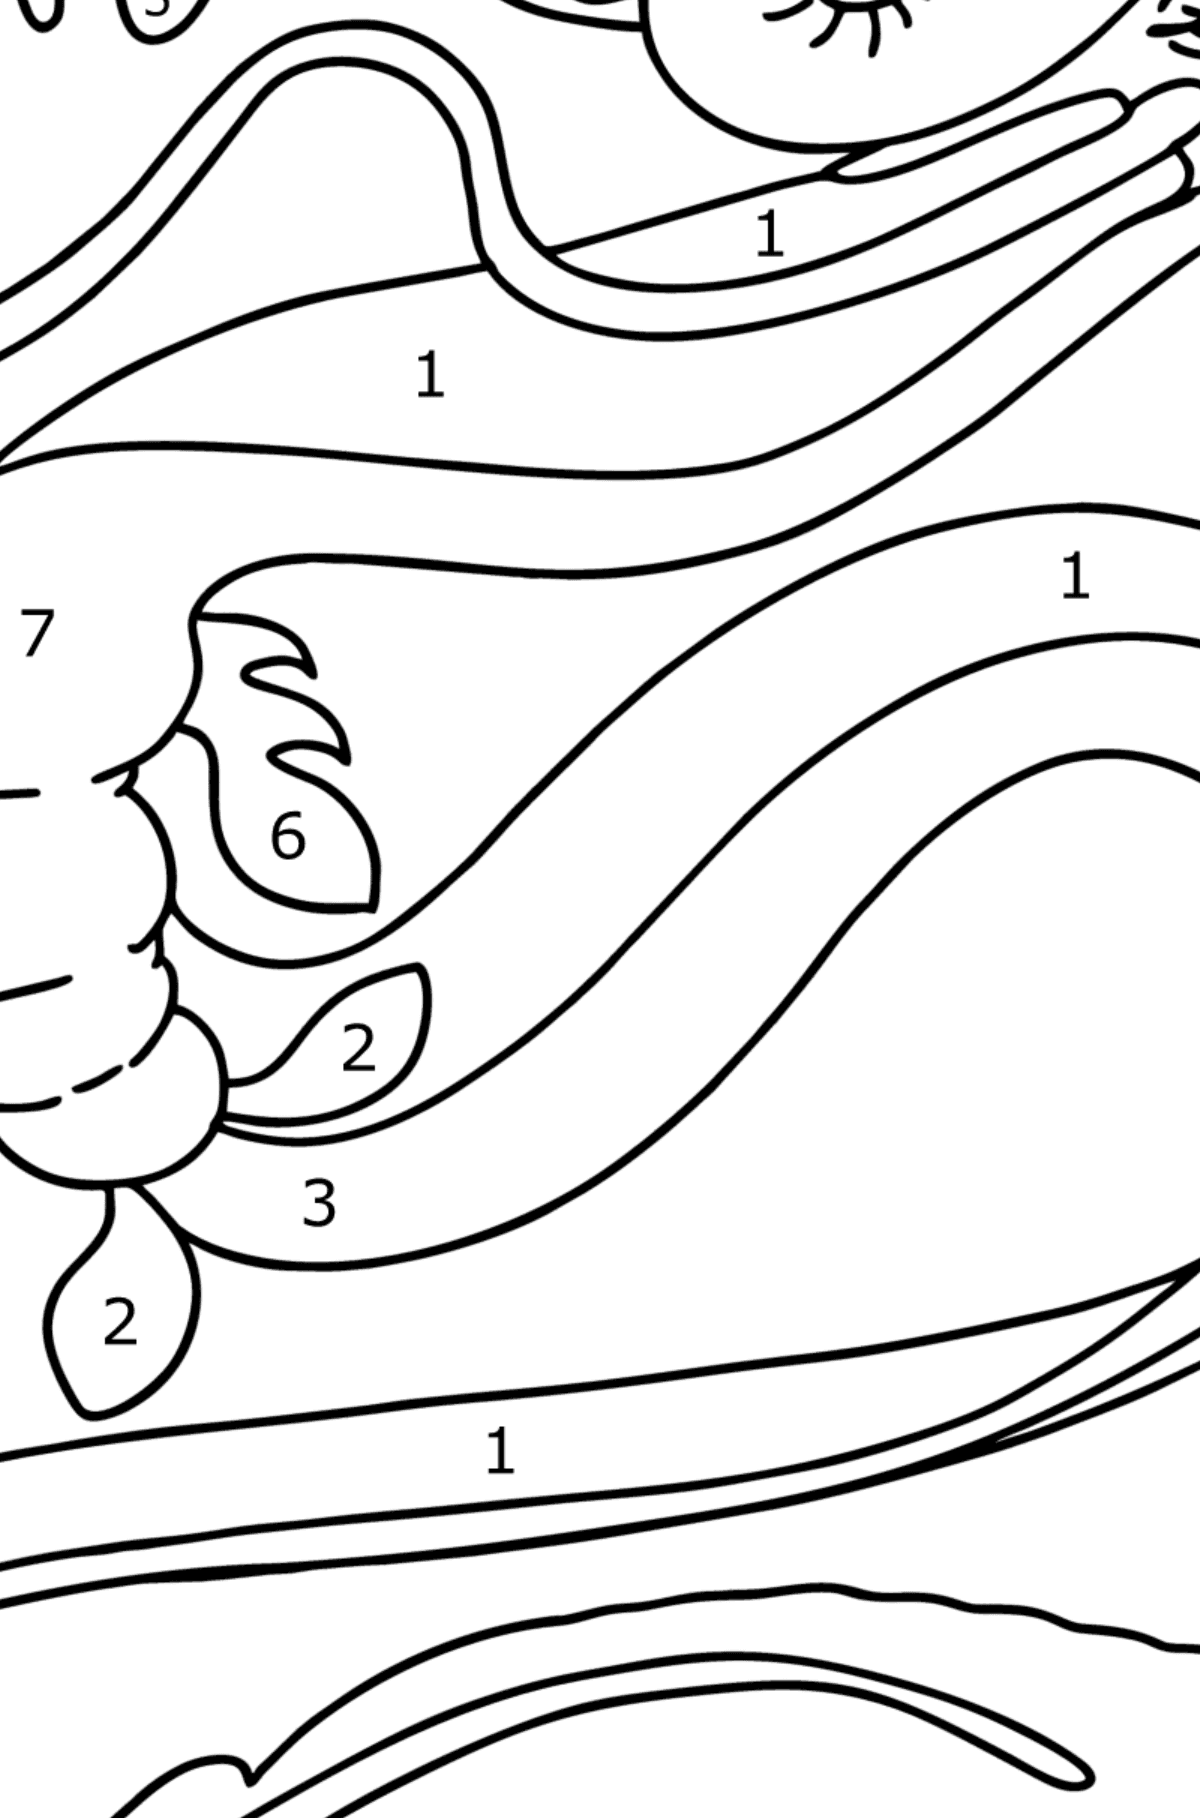 Snake Dragon coloring page - Coloring by Numbers for Kids